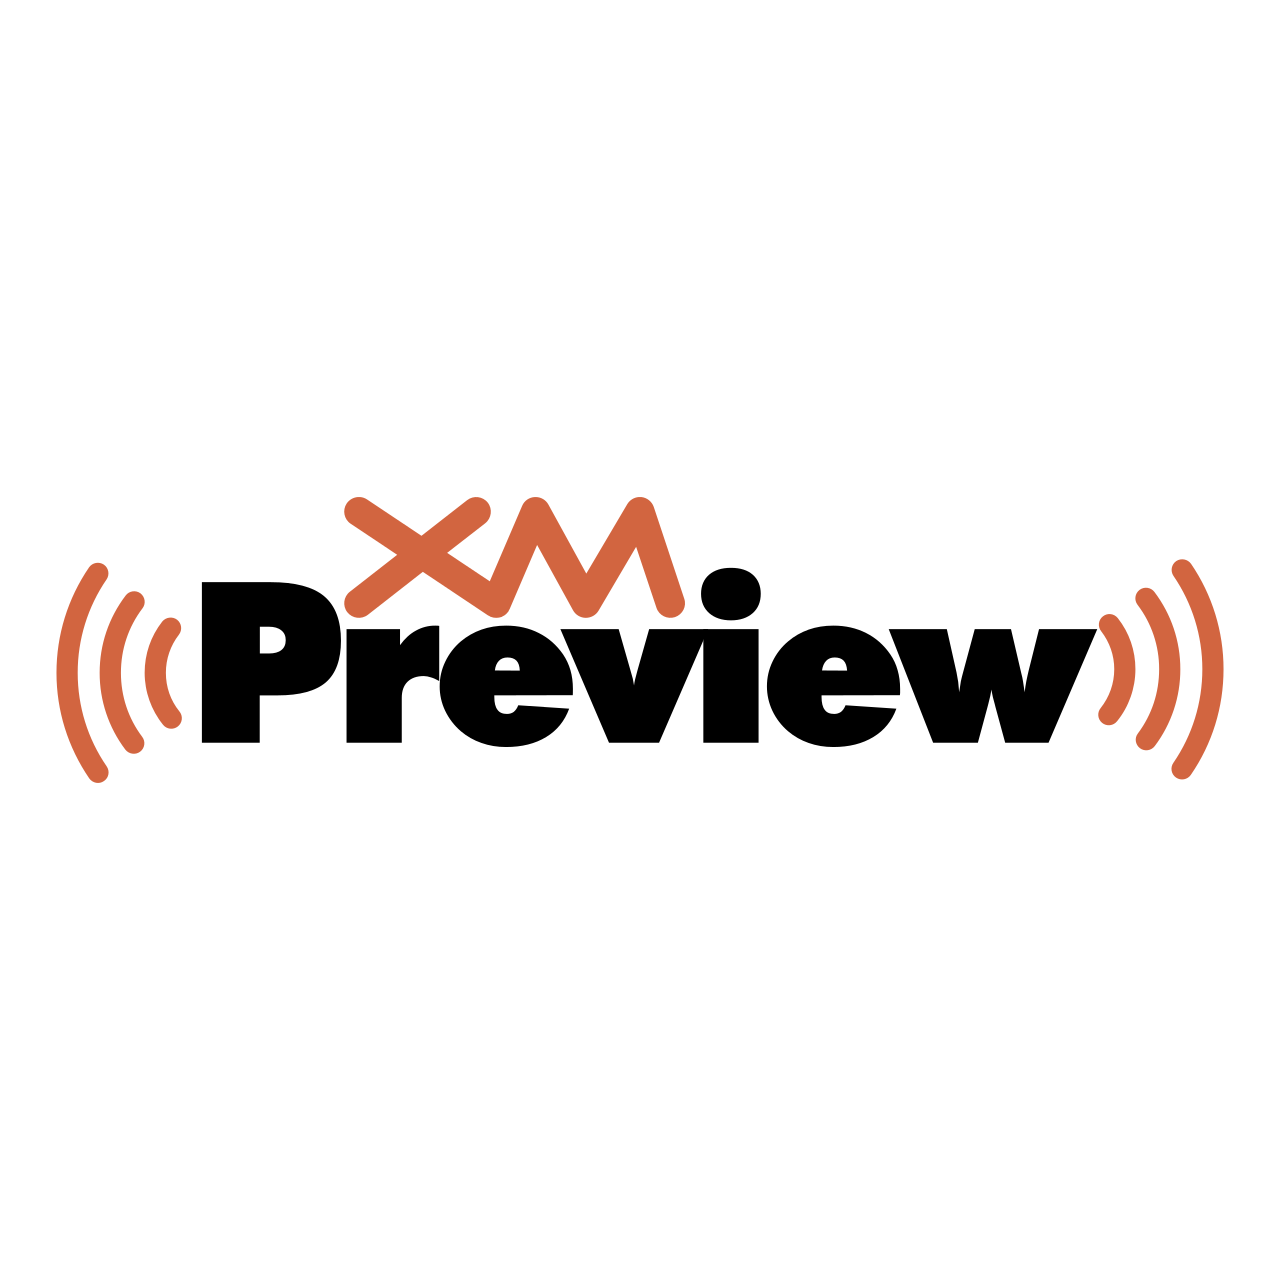 Download Xm preview Logo PNG and Vector (PDF, SVG, Ai, EPS) Free